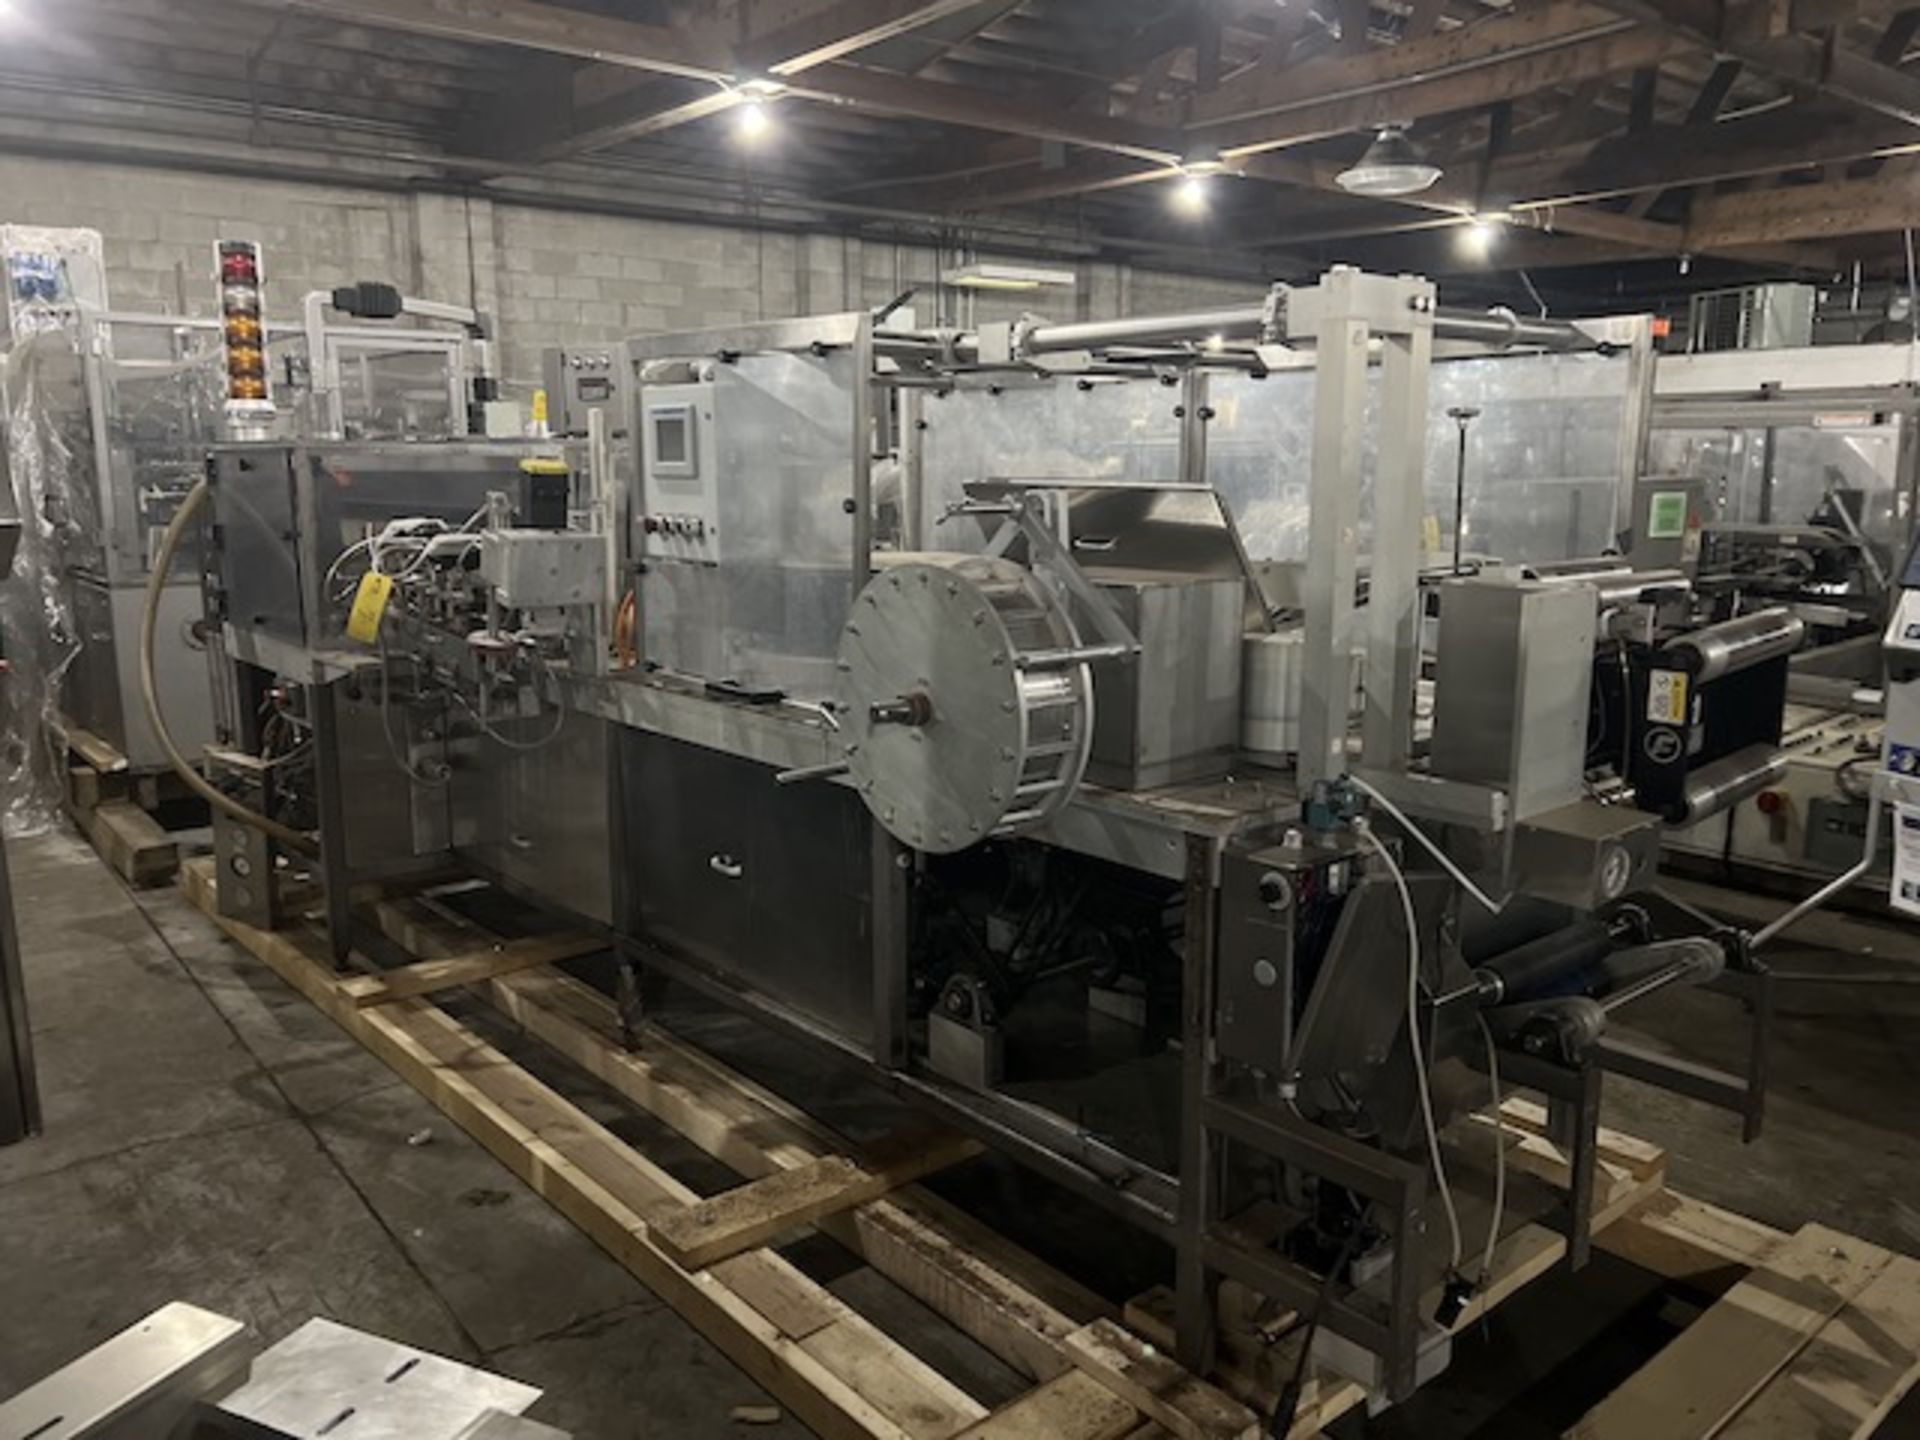 Cloud Packaging Machine, S/N #2917, Volts 480, 3 Phase, 60 Hz, Located in Ottawa, OH - Image 2 of 10